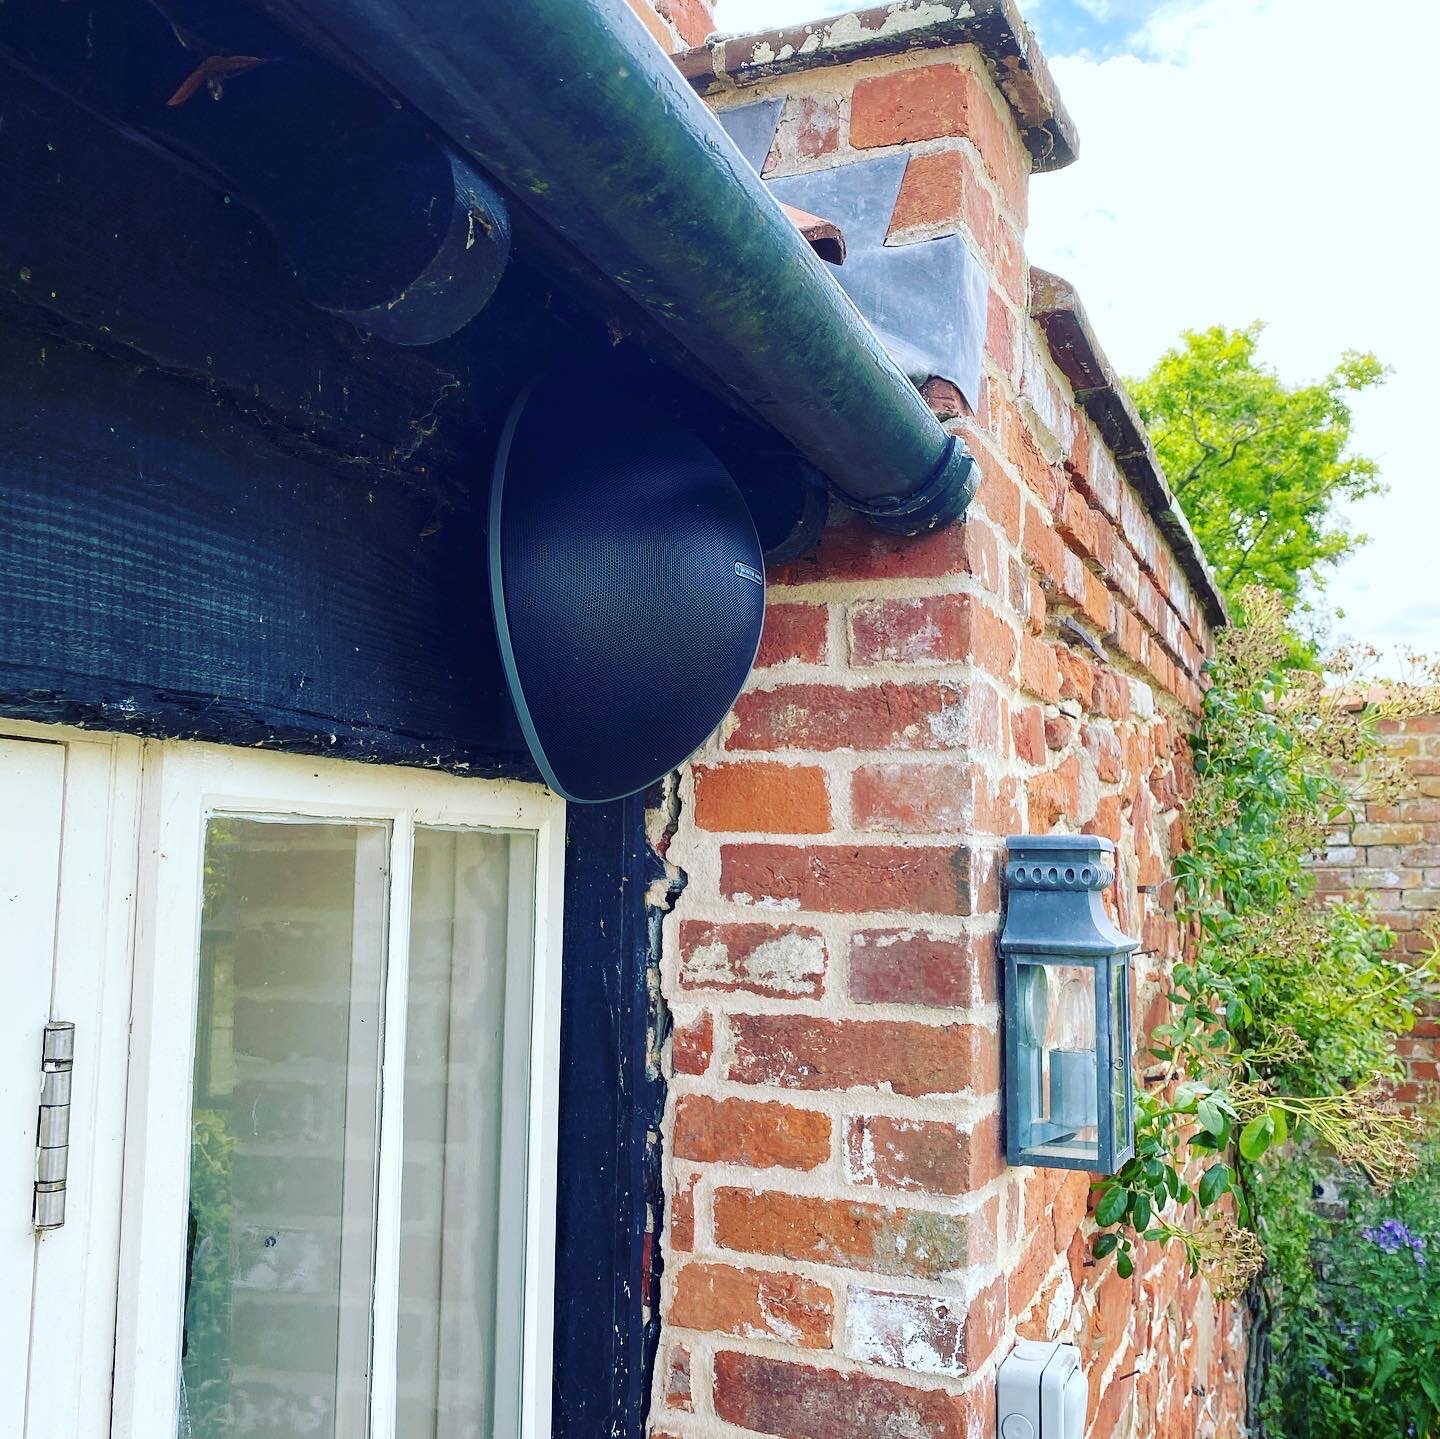 Monitor Audio speaker mounted to a brick wall on the outside of a property.